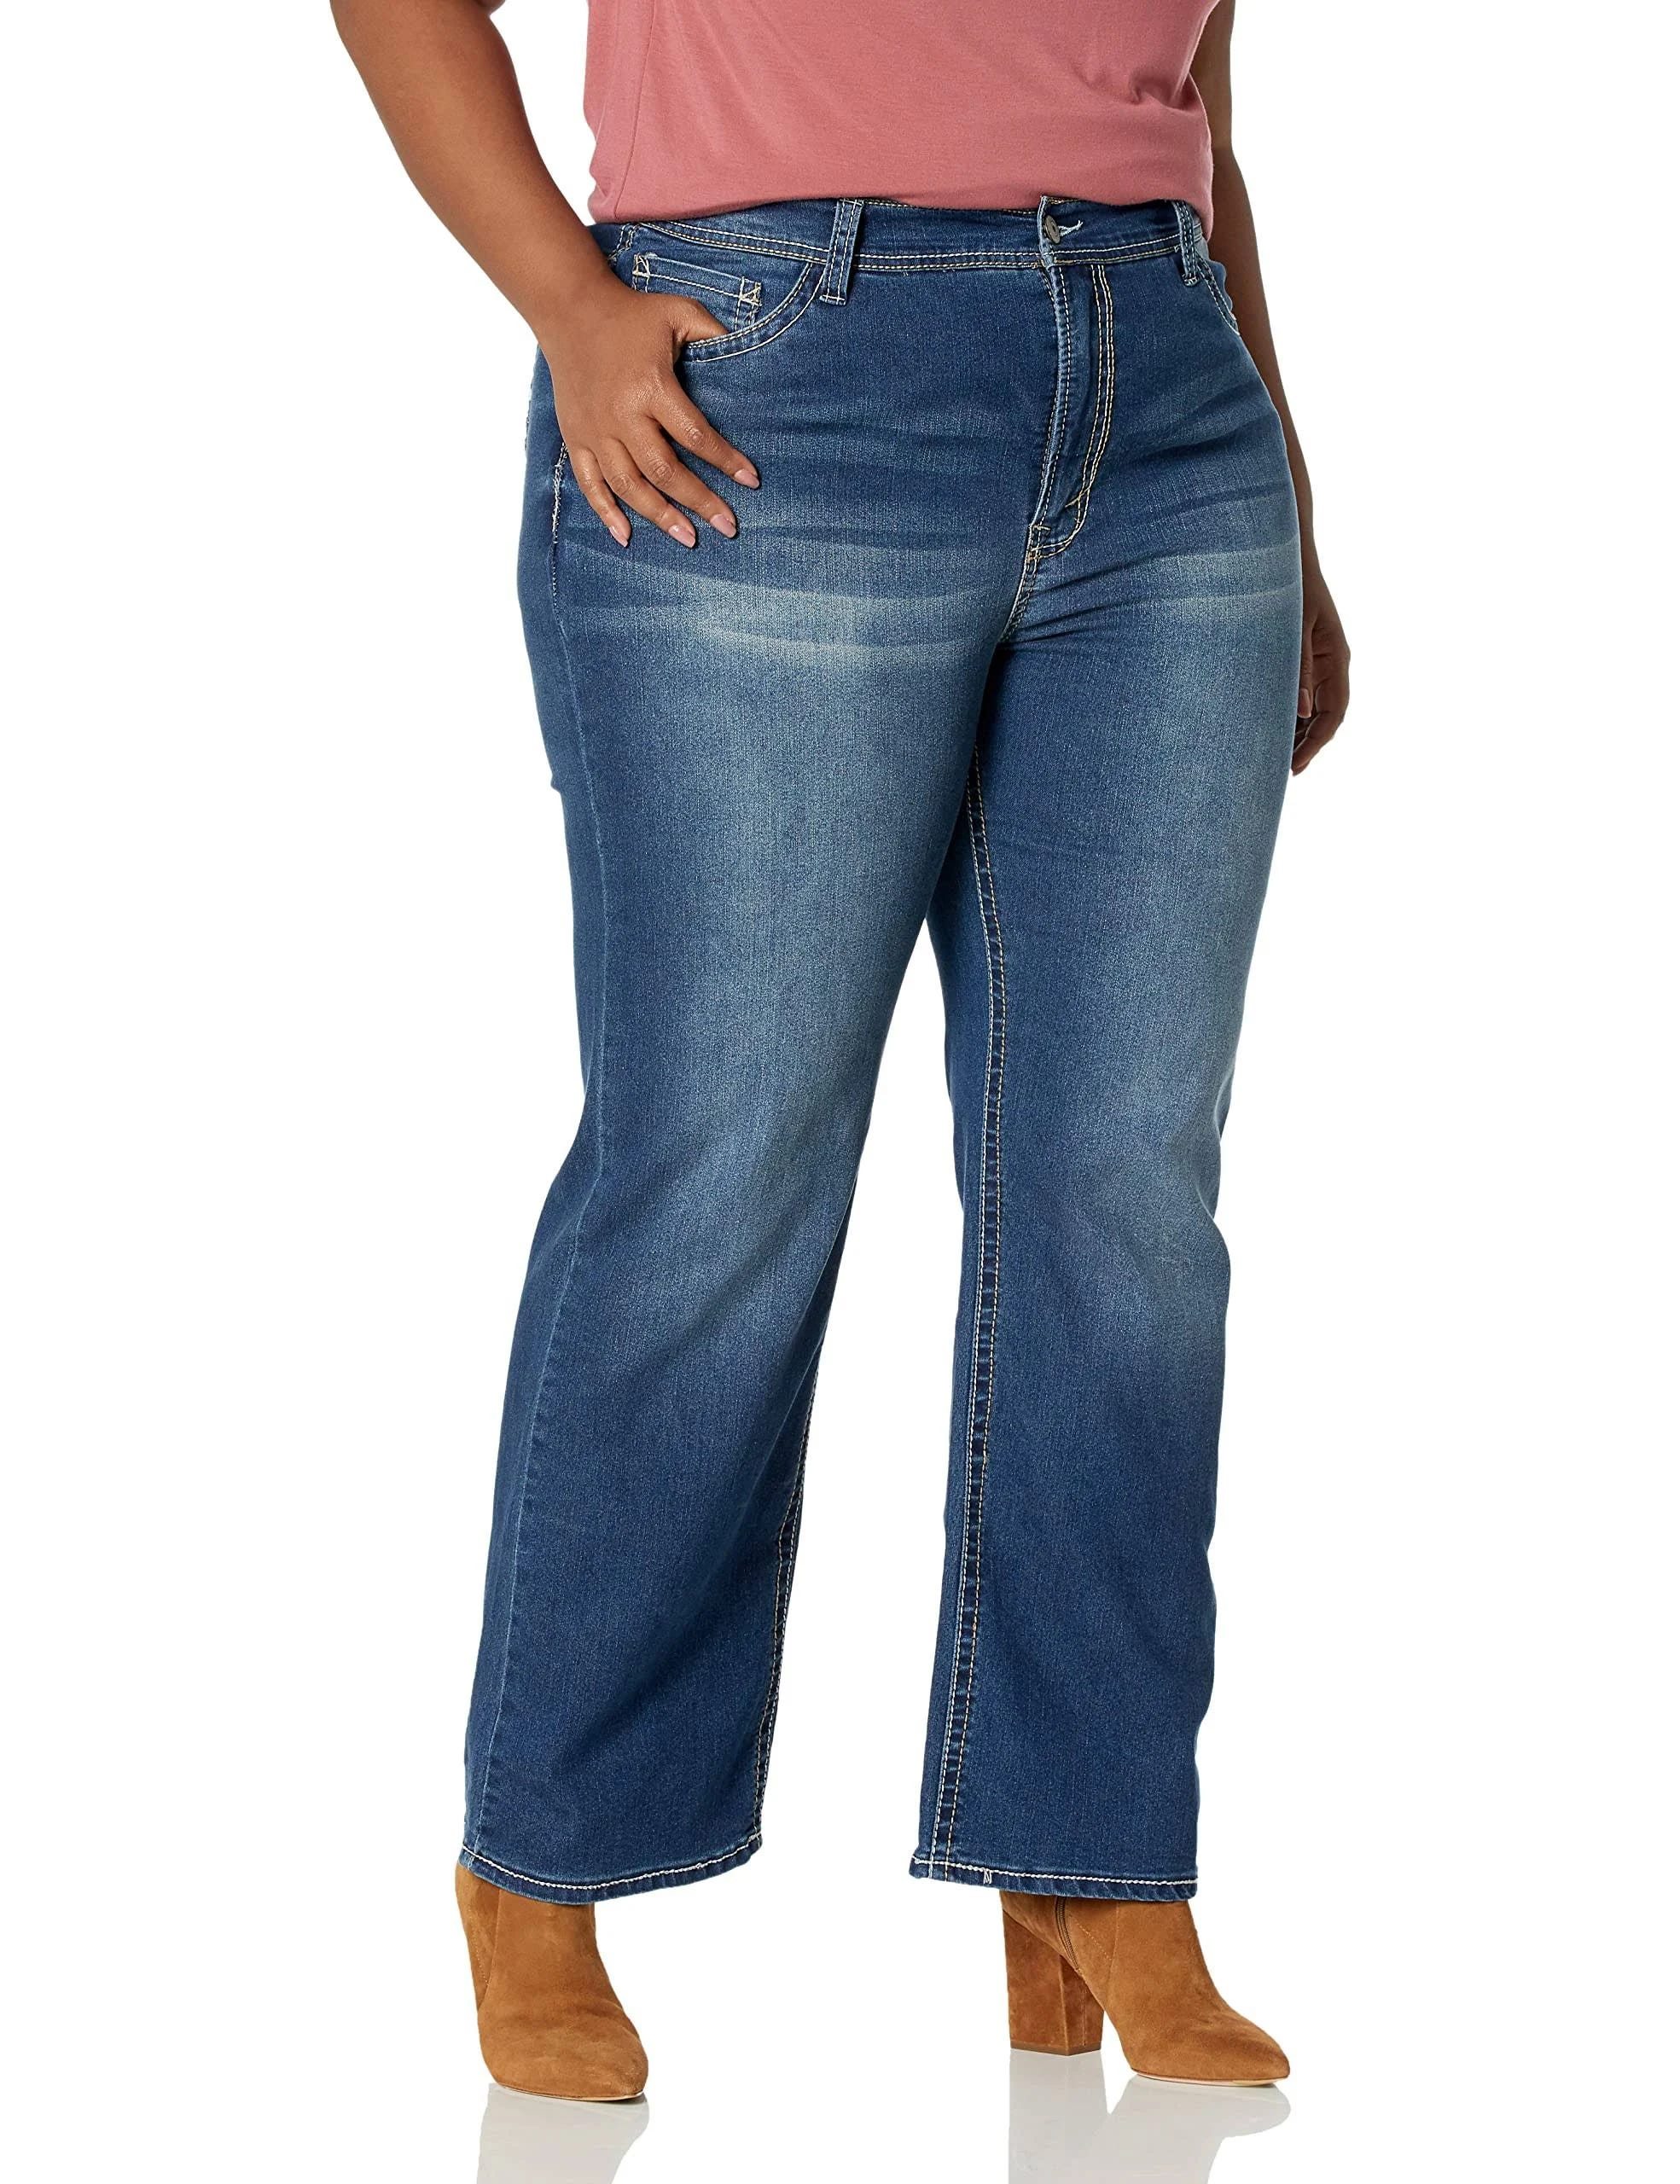 All-Purpose Super Stretchy Women's Jeans for Instant Comfort | Image